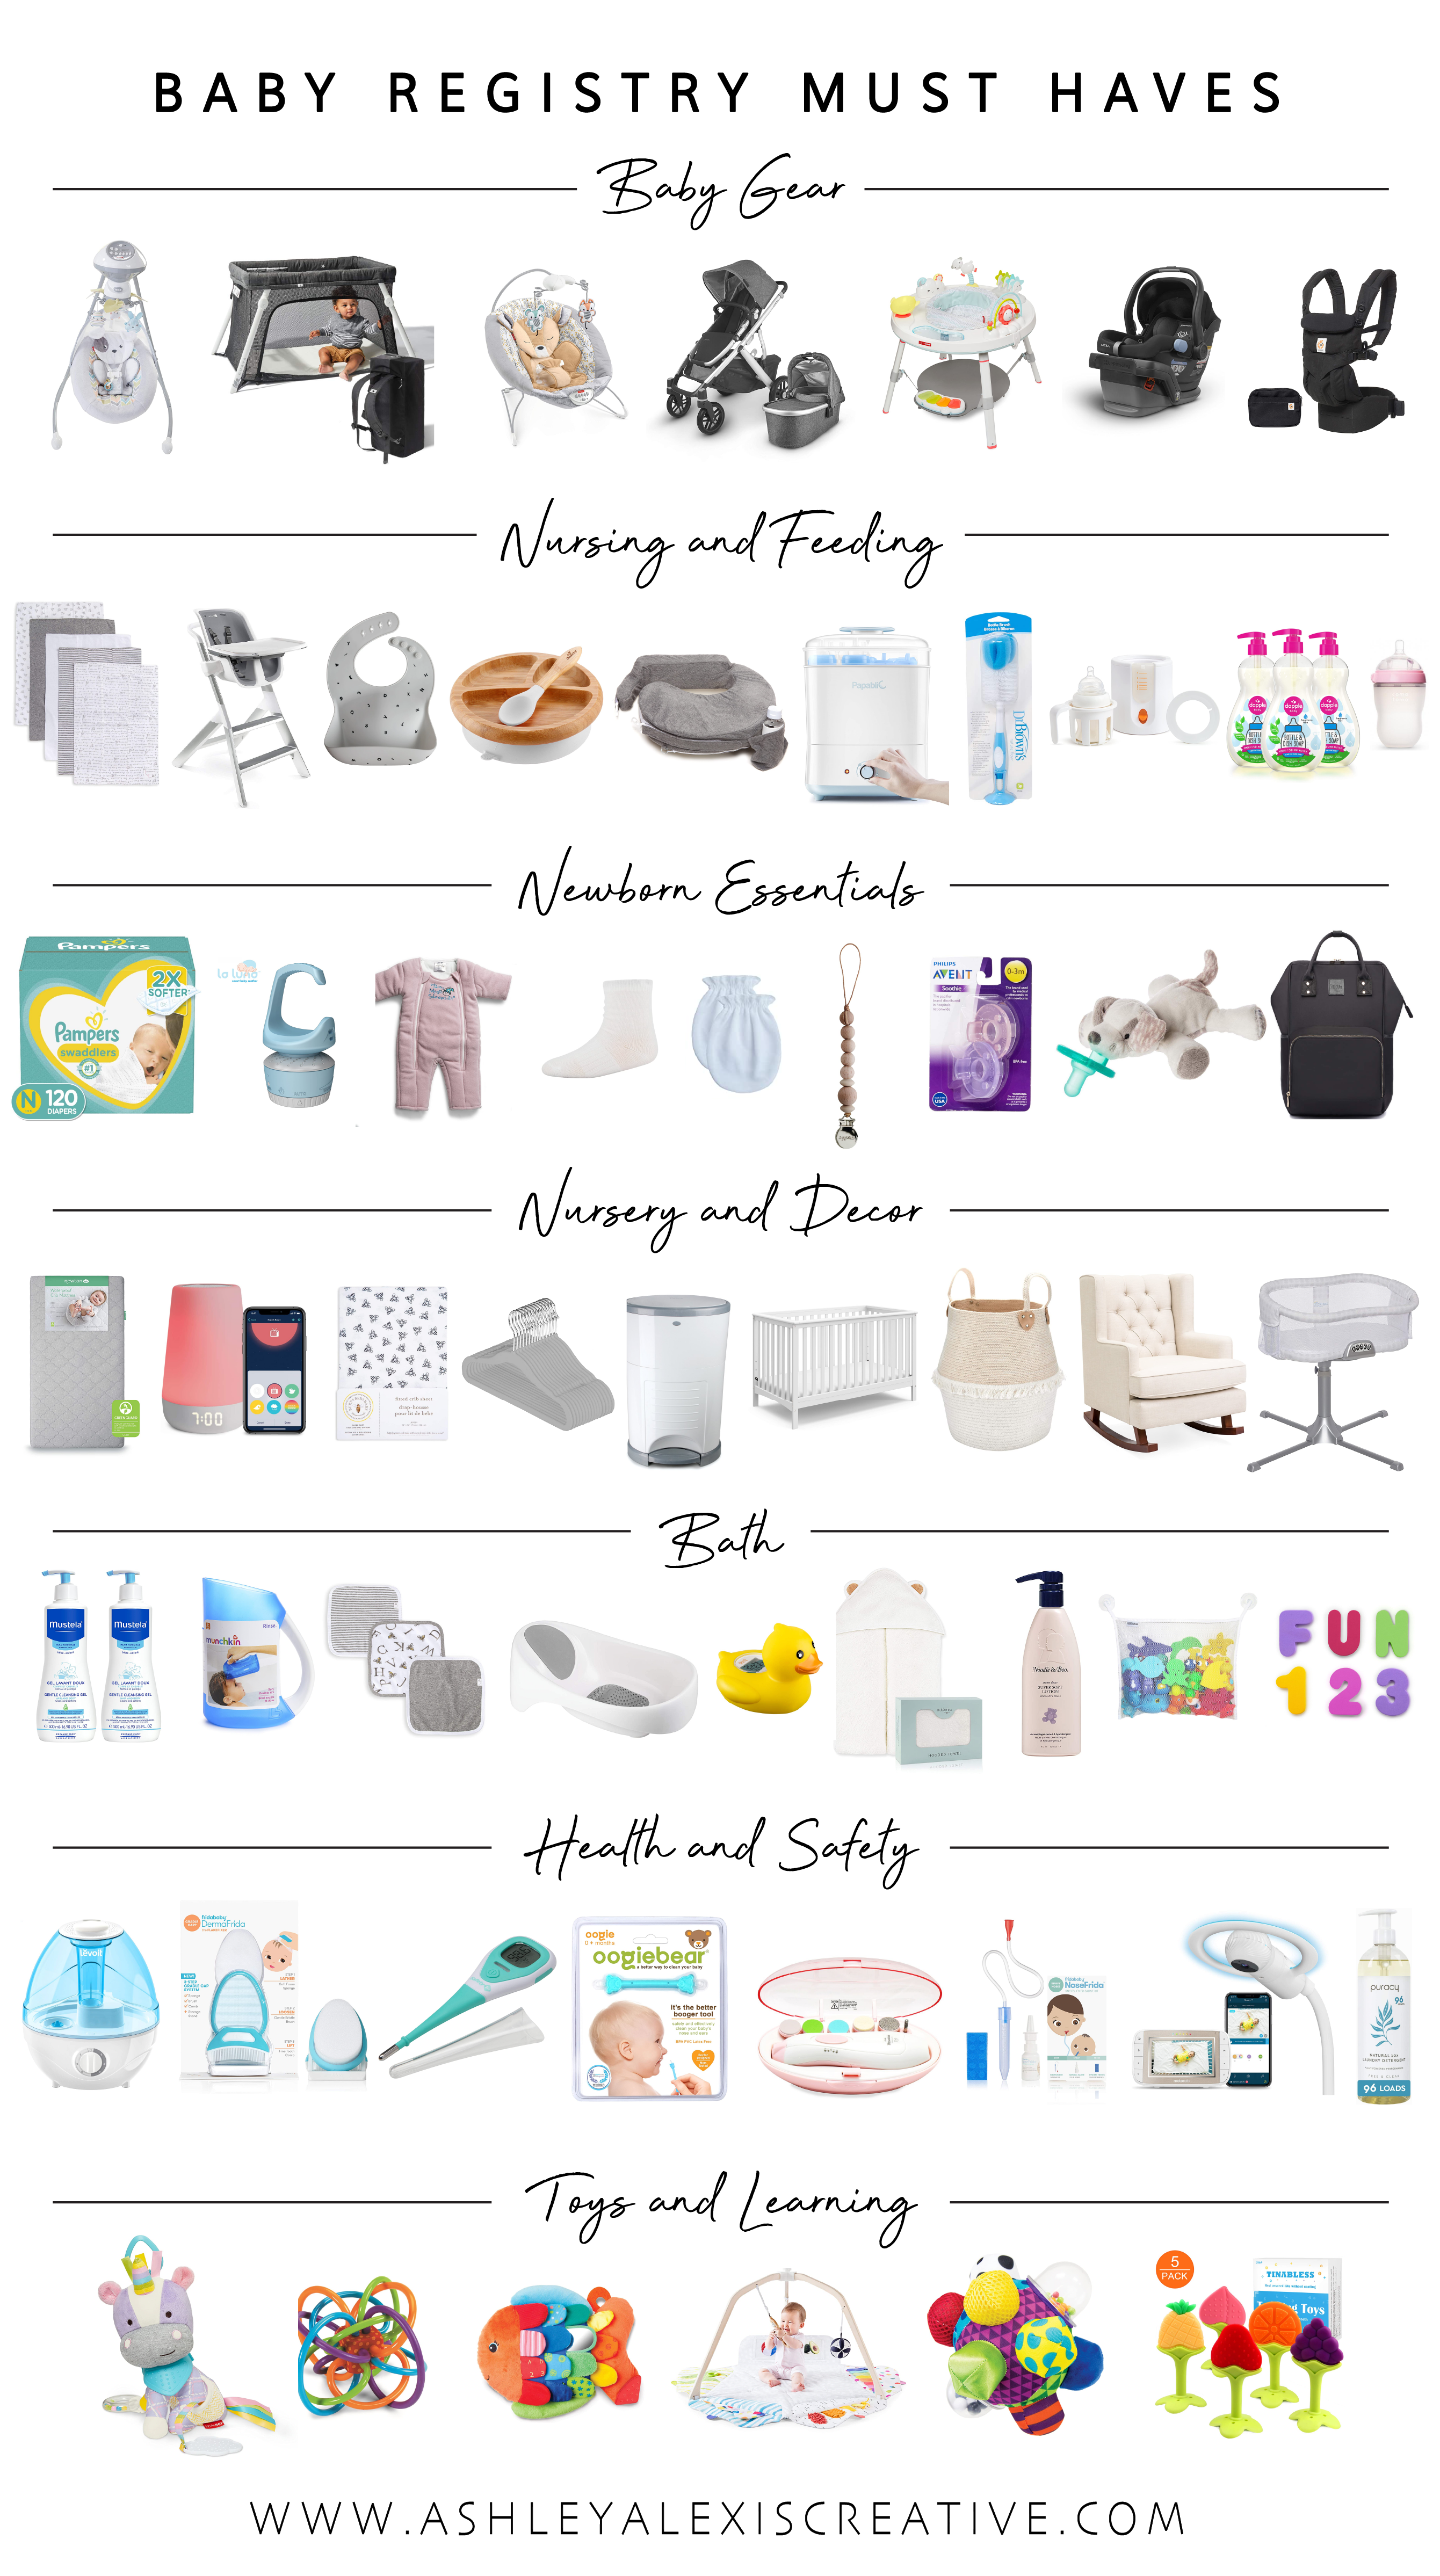 BABY REGISTRY MUST-HAVES • Ashley Alexis Creative